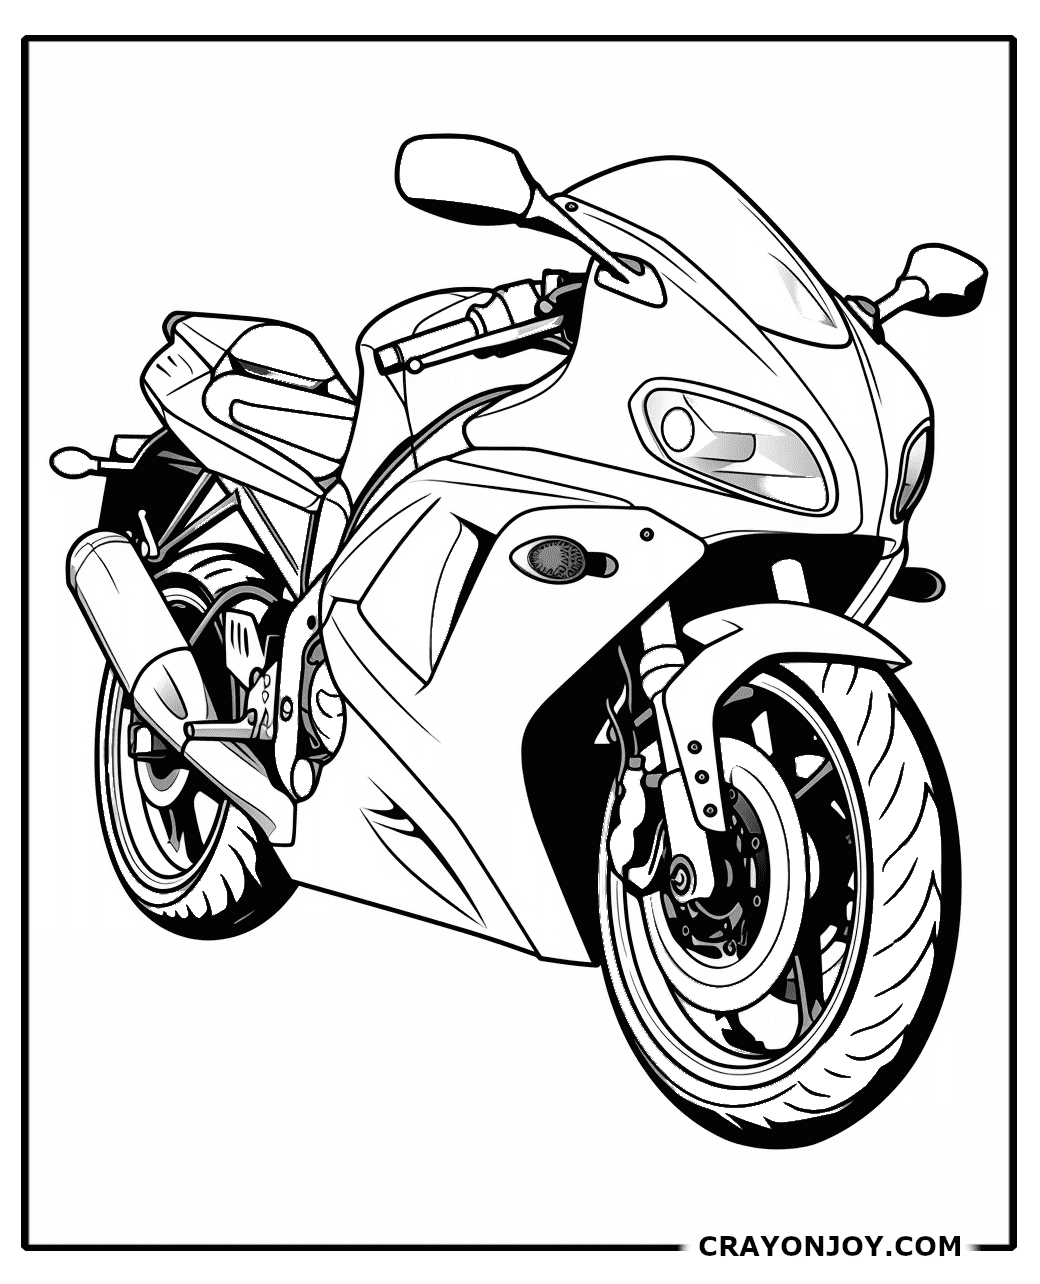 Free Printable Motorcycle Coloring Pages for Kids and Adults